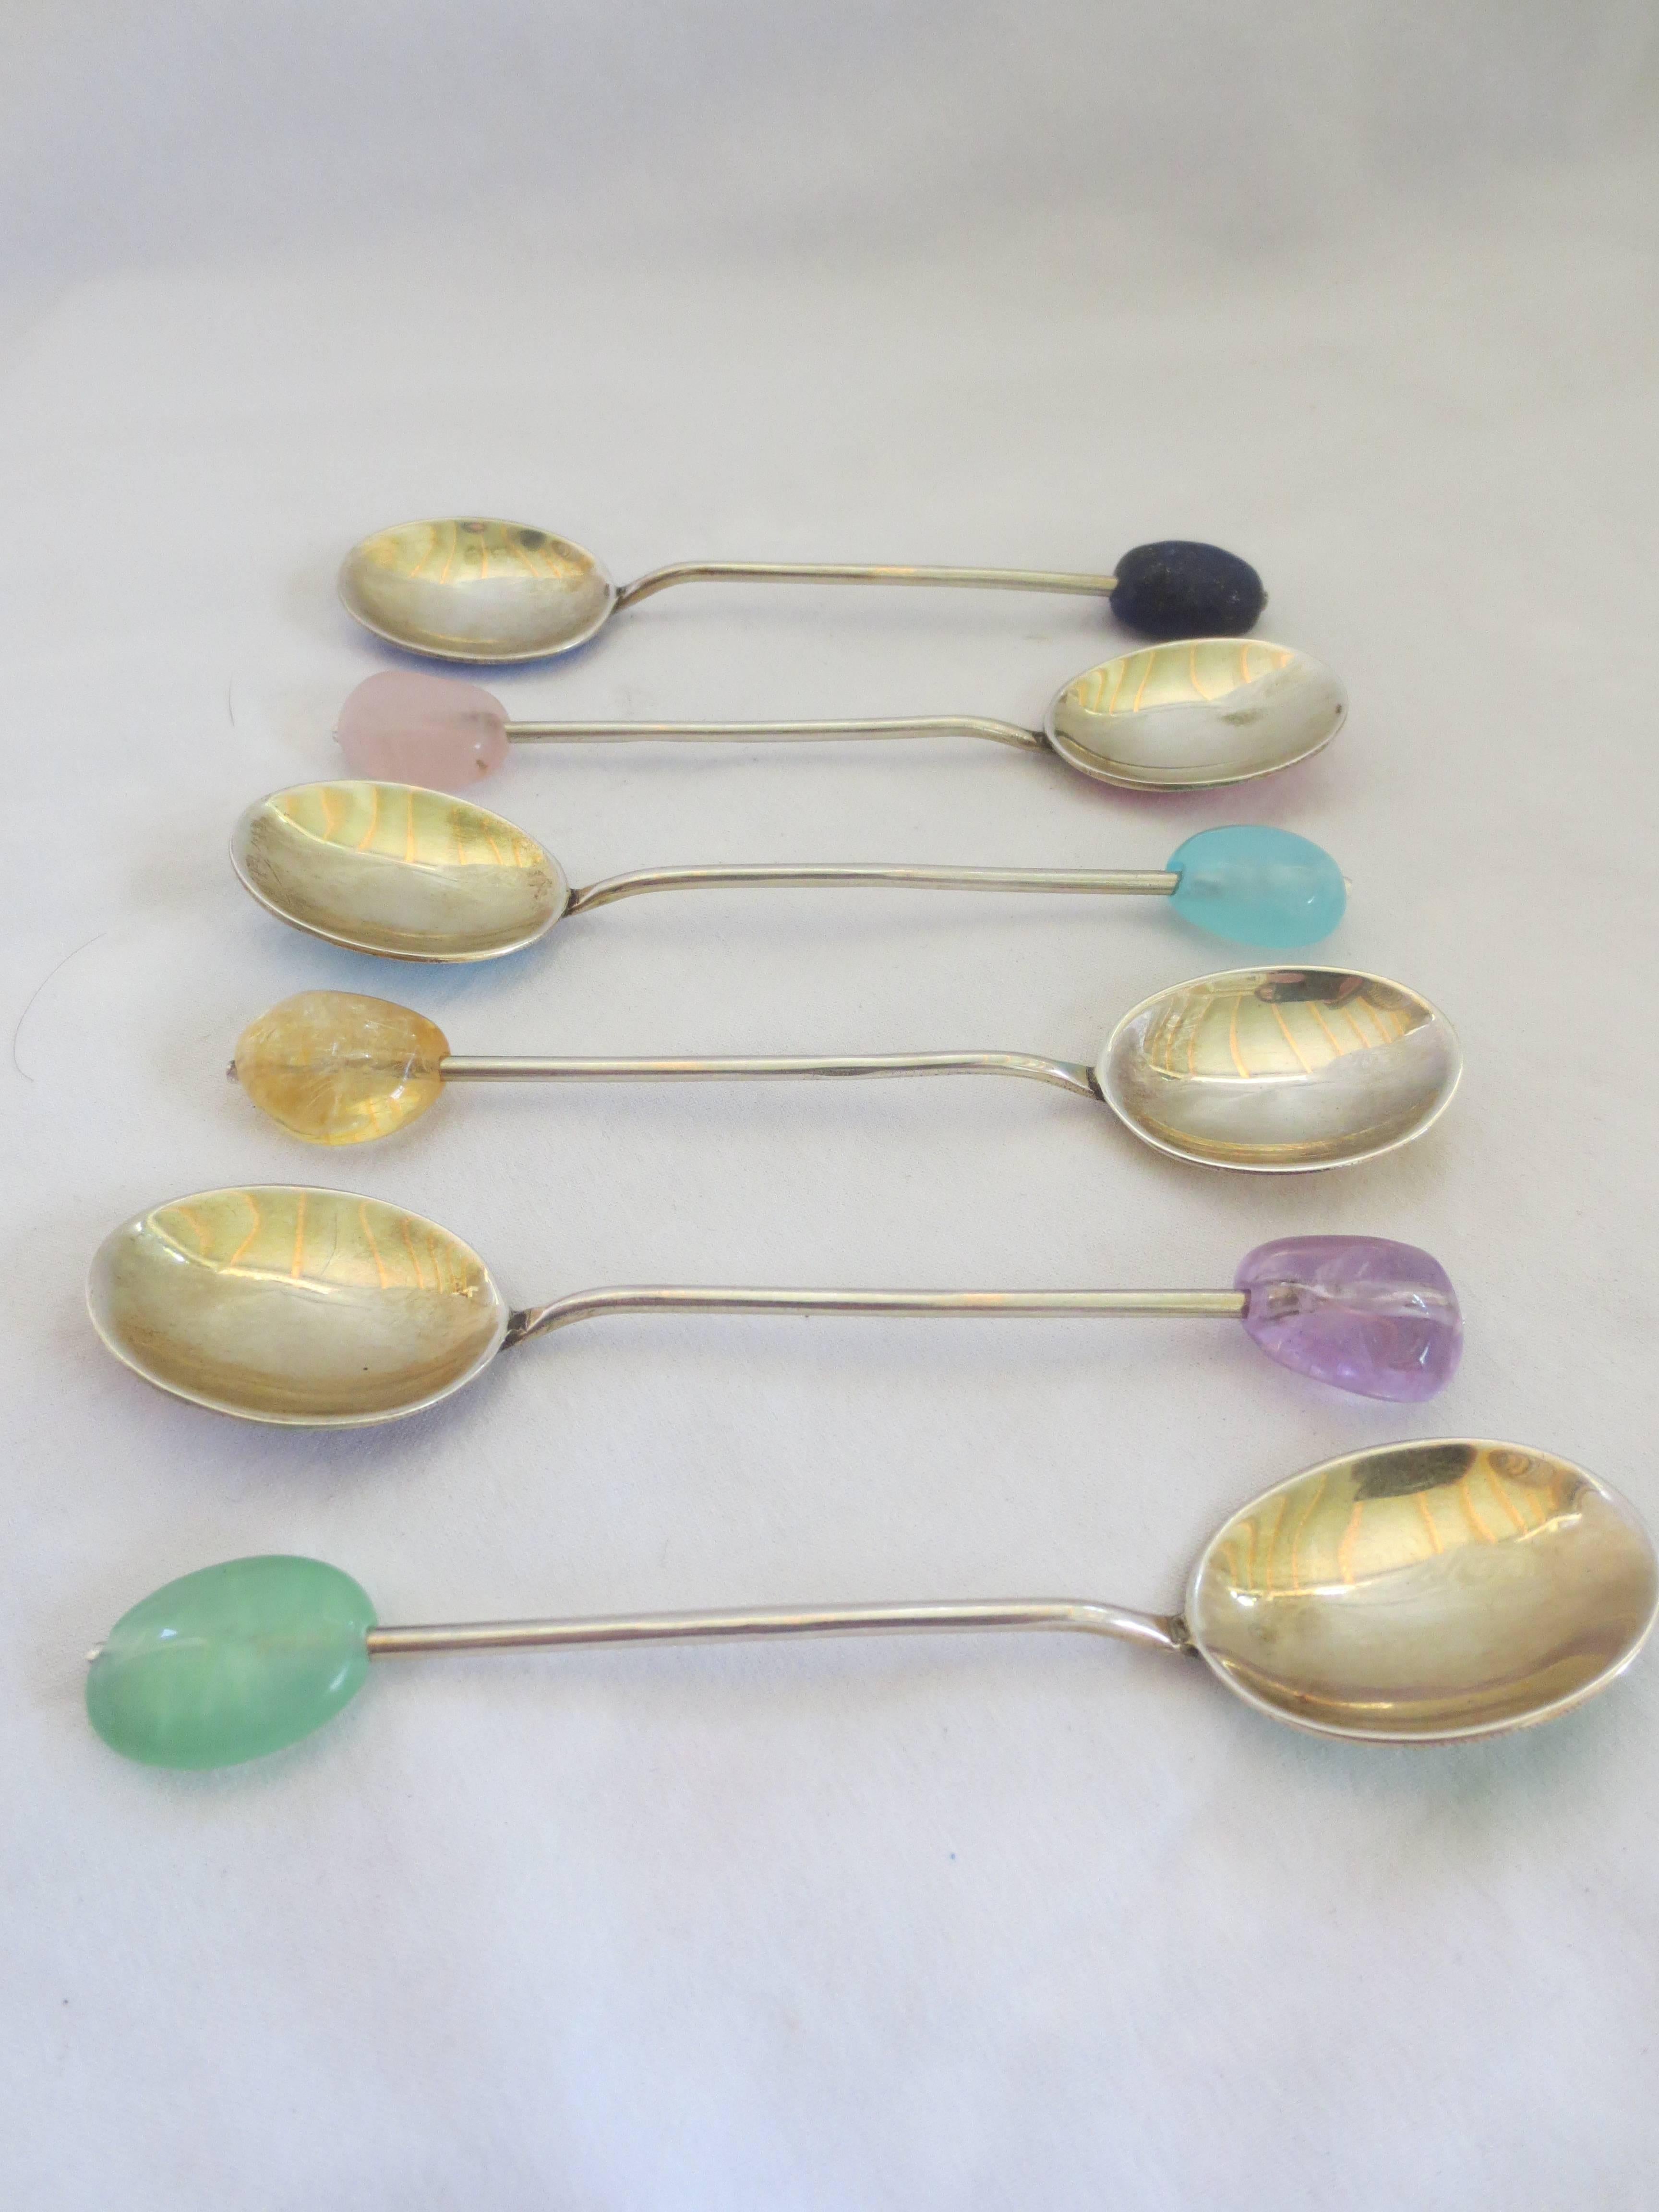 One-of-a-kind Enameled Silver Spoons Refurbished with Semi precious stone beads. 1